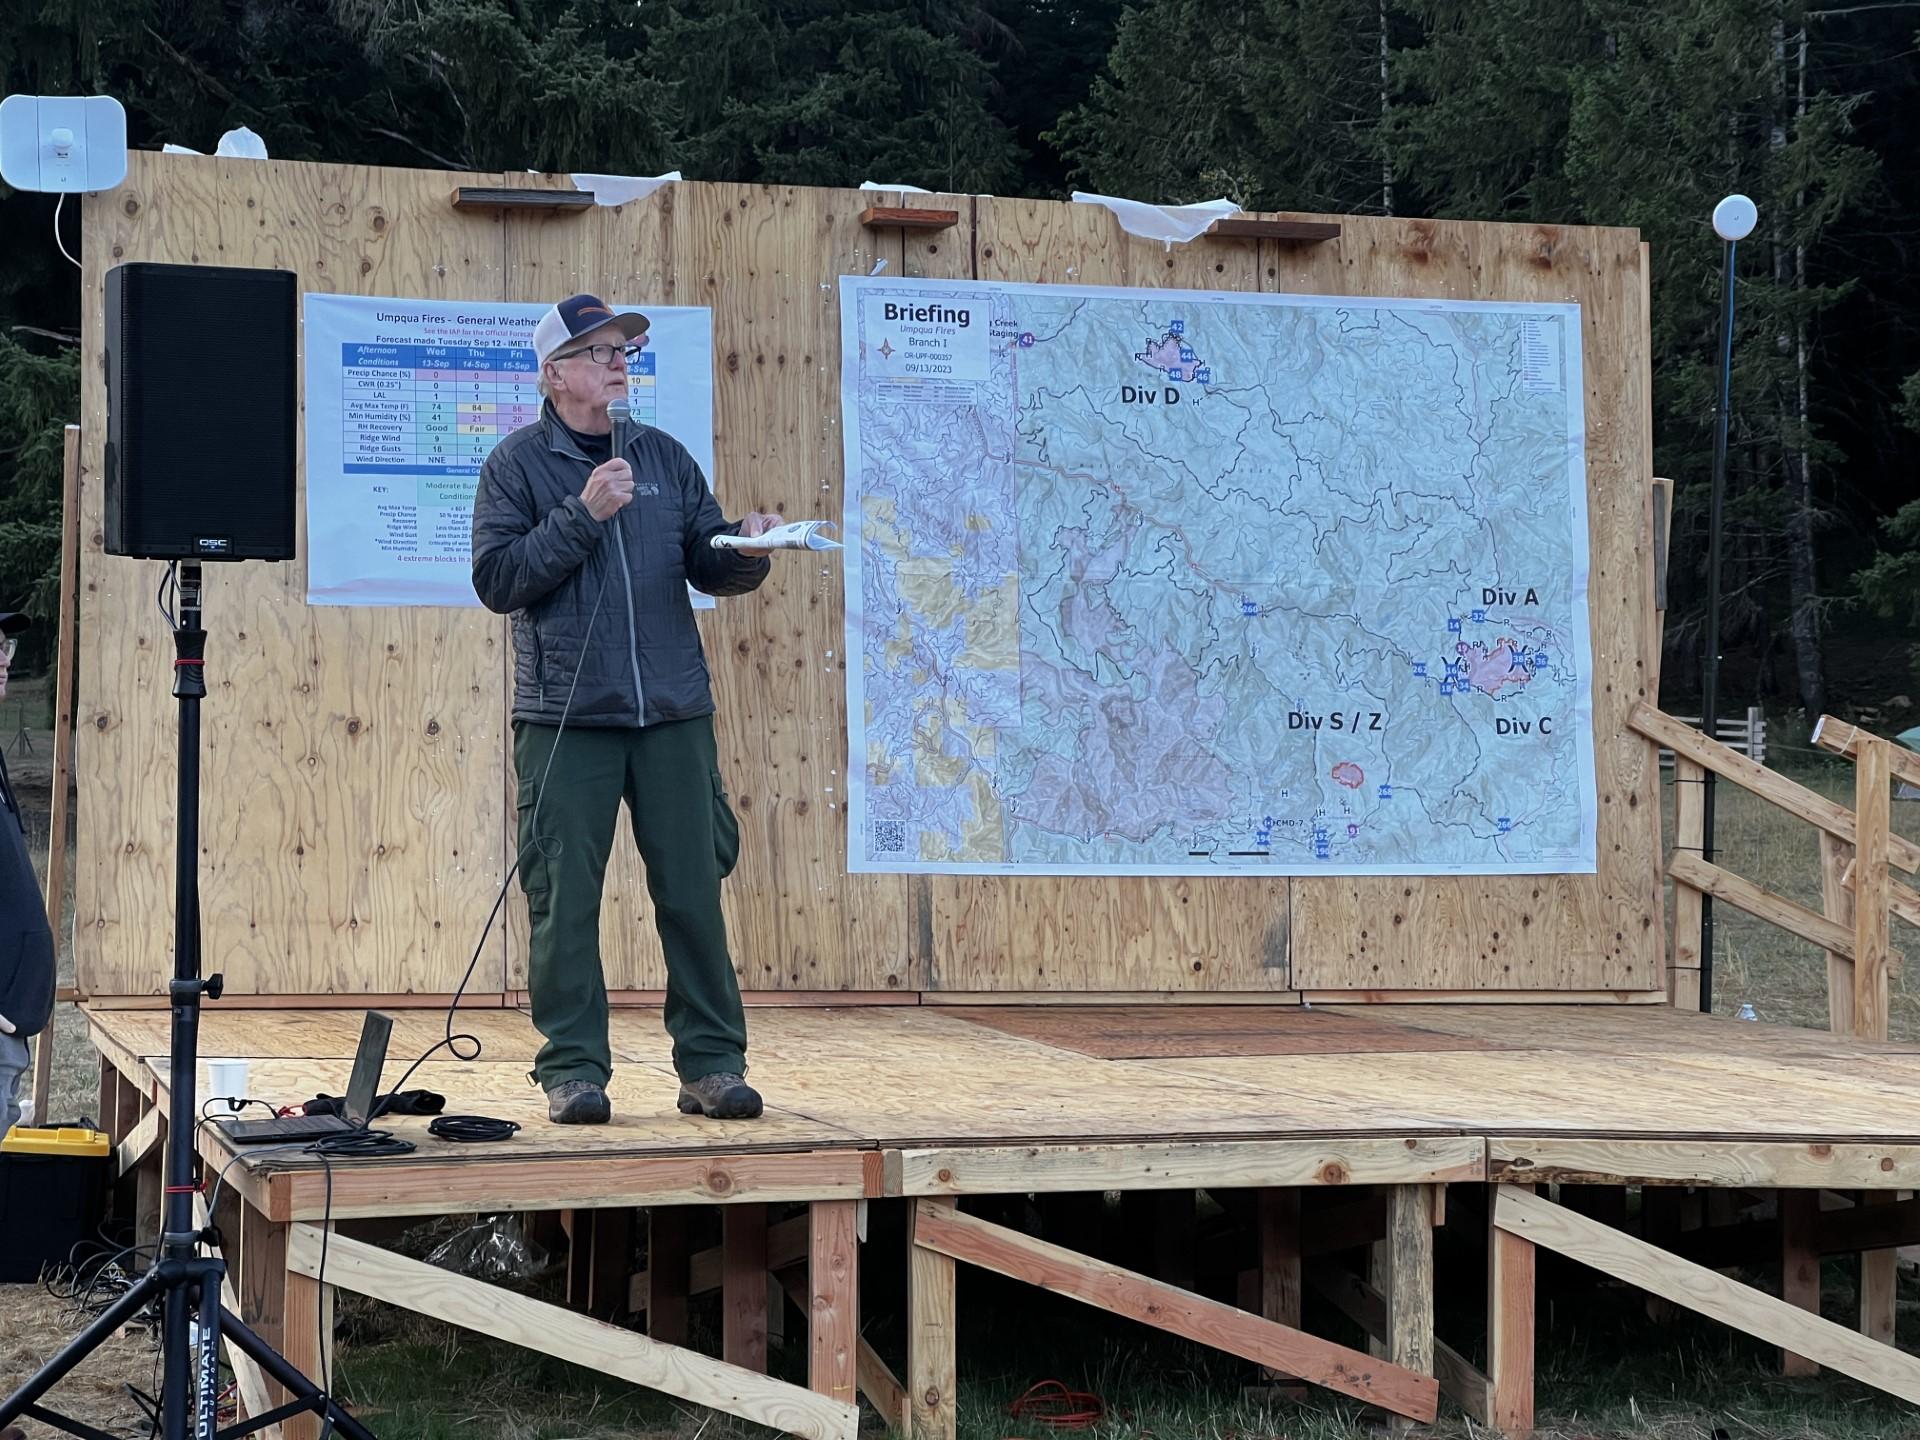 A fire manager speaks into a microphone on stage with a map posted behind him